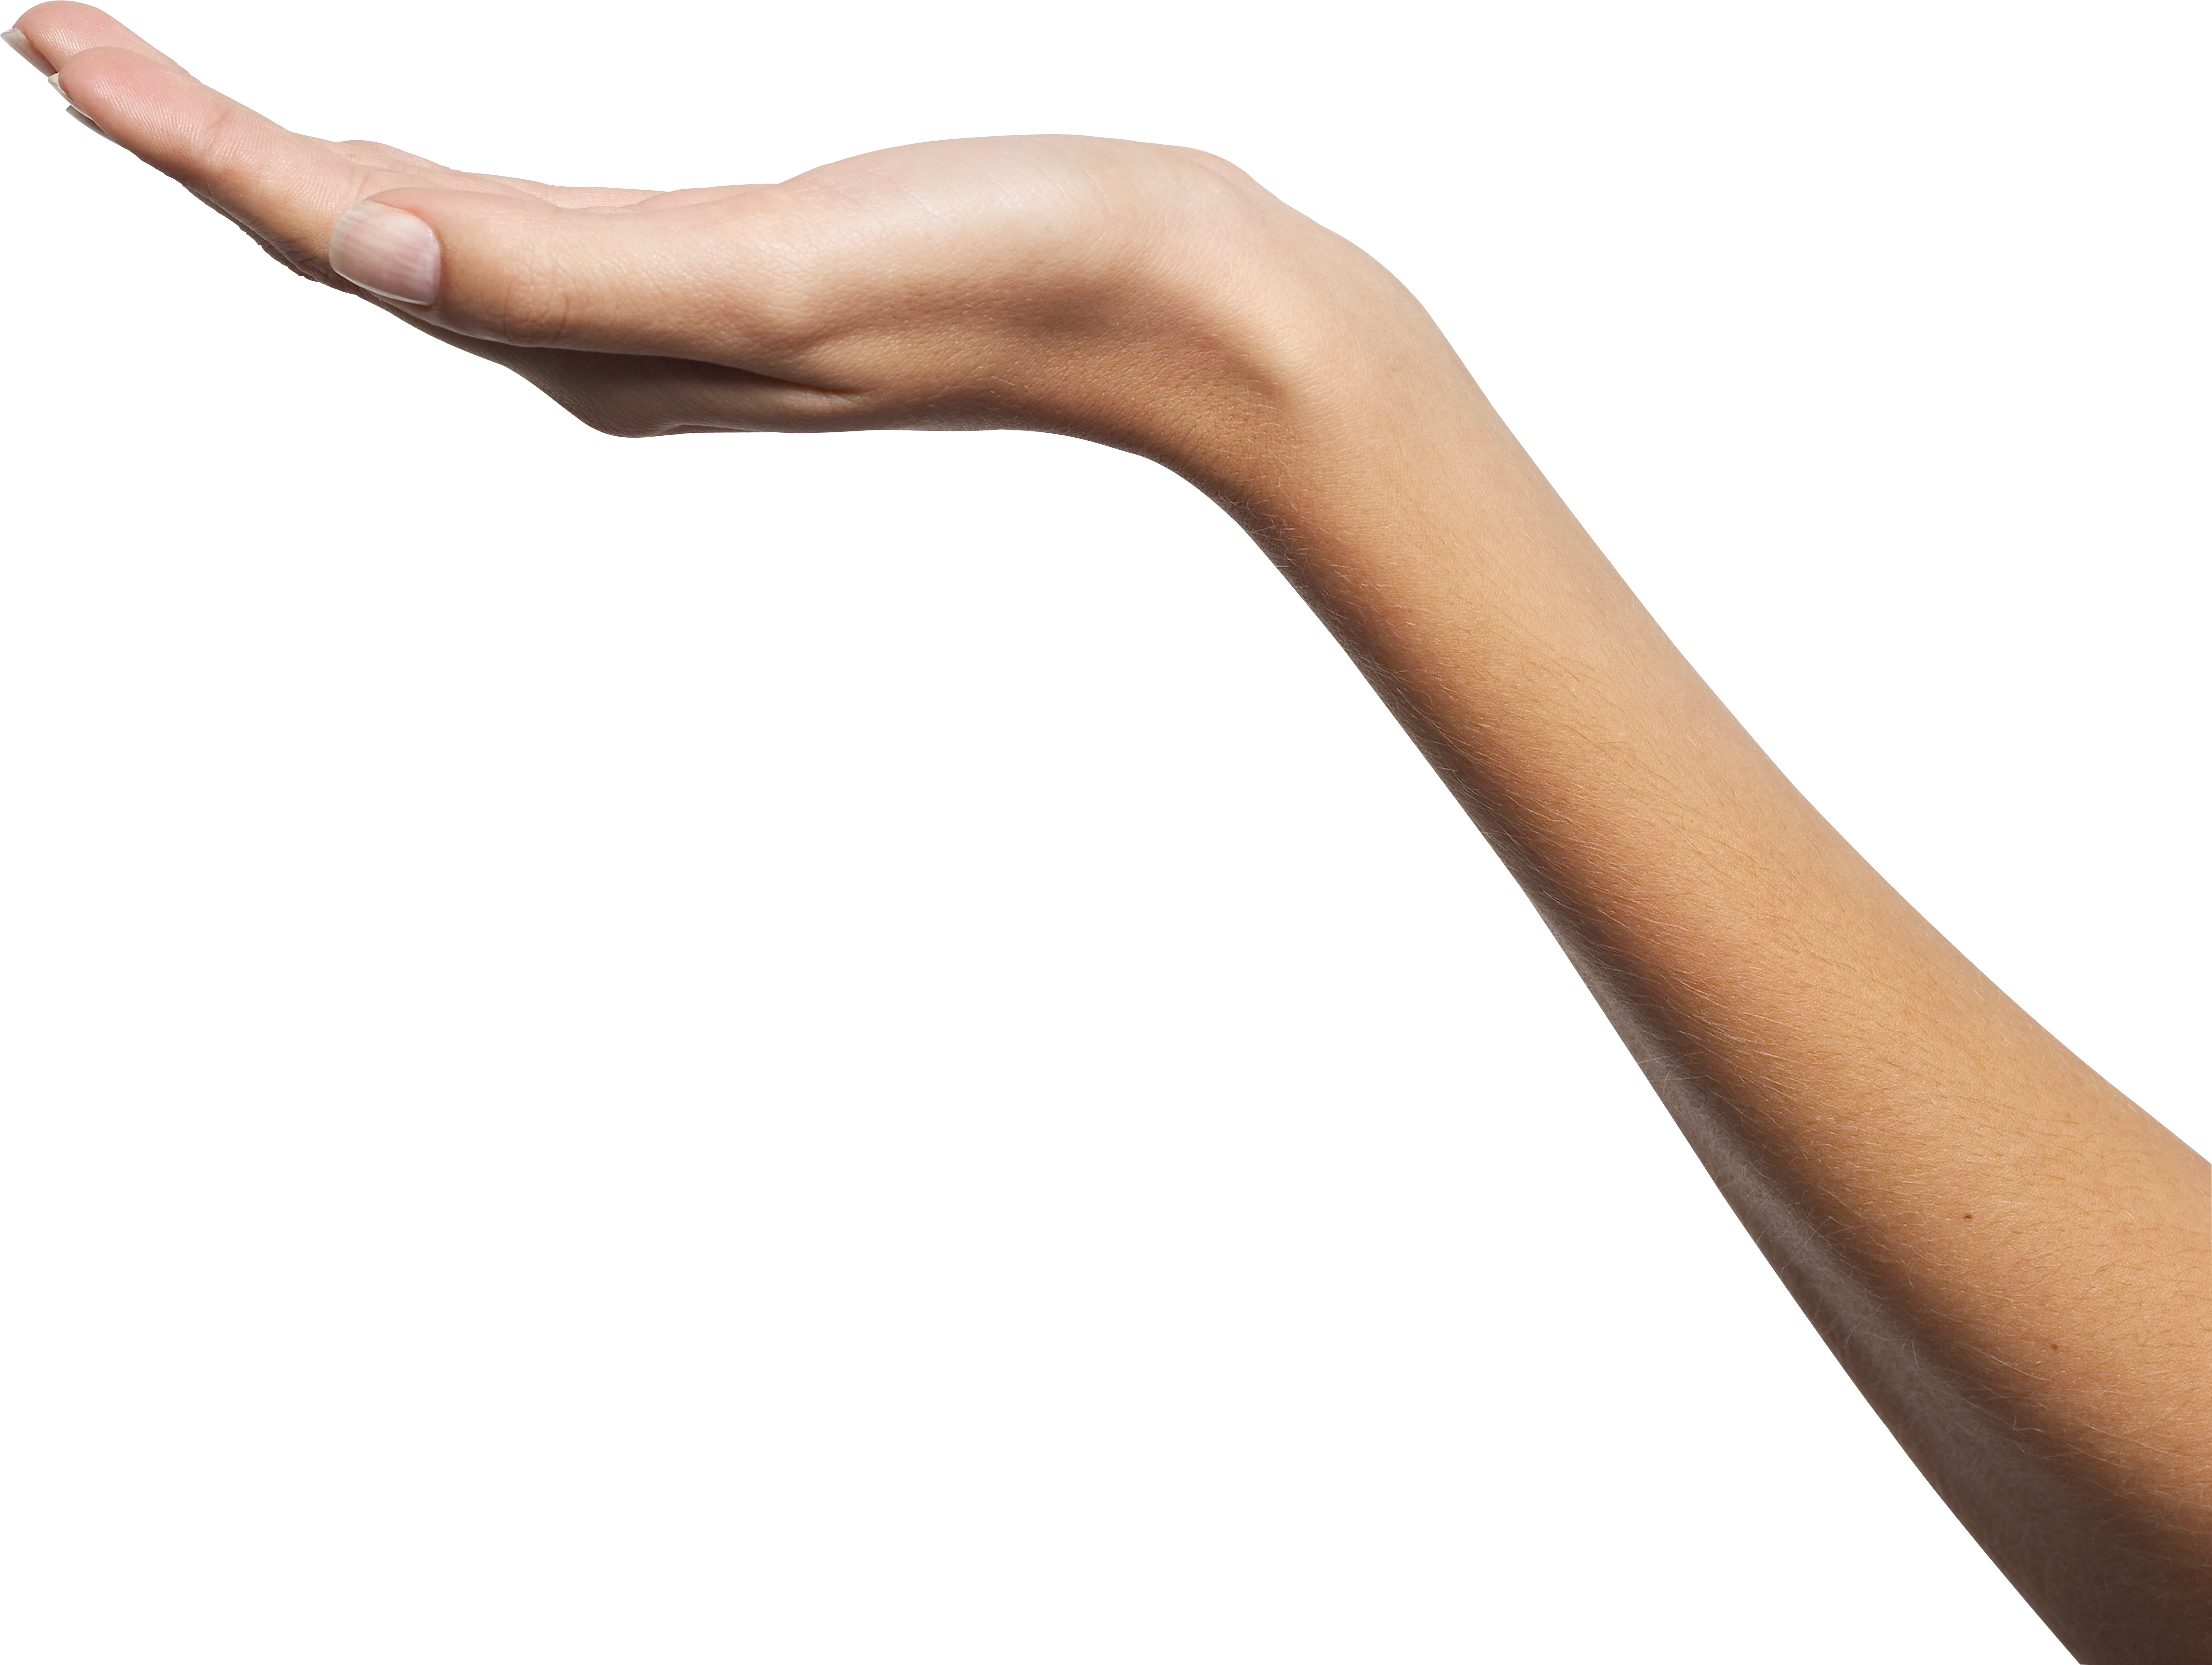 hand PNG, Hands PNG images, PNG image: hand PNG, free PNG image, Hands.